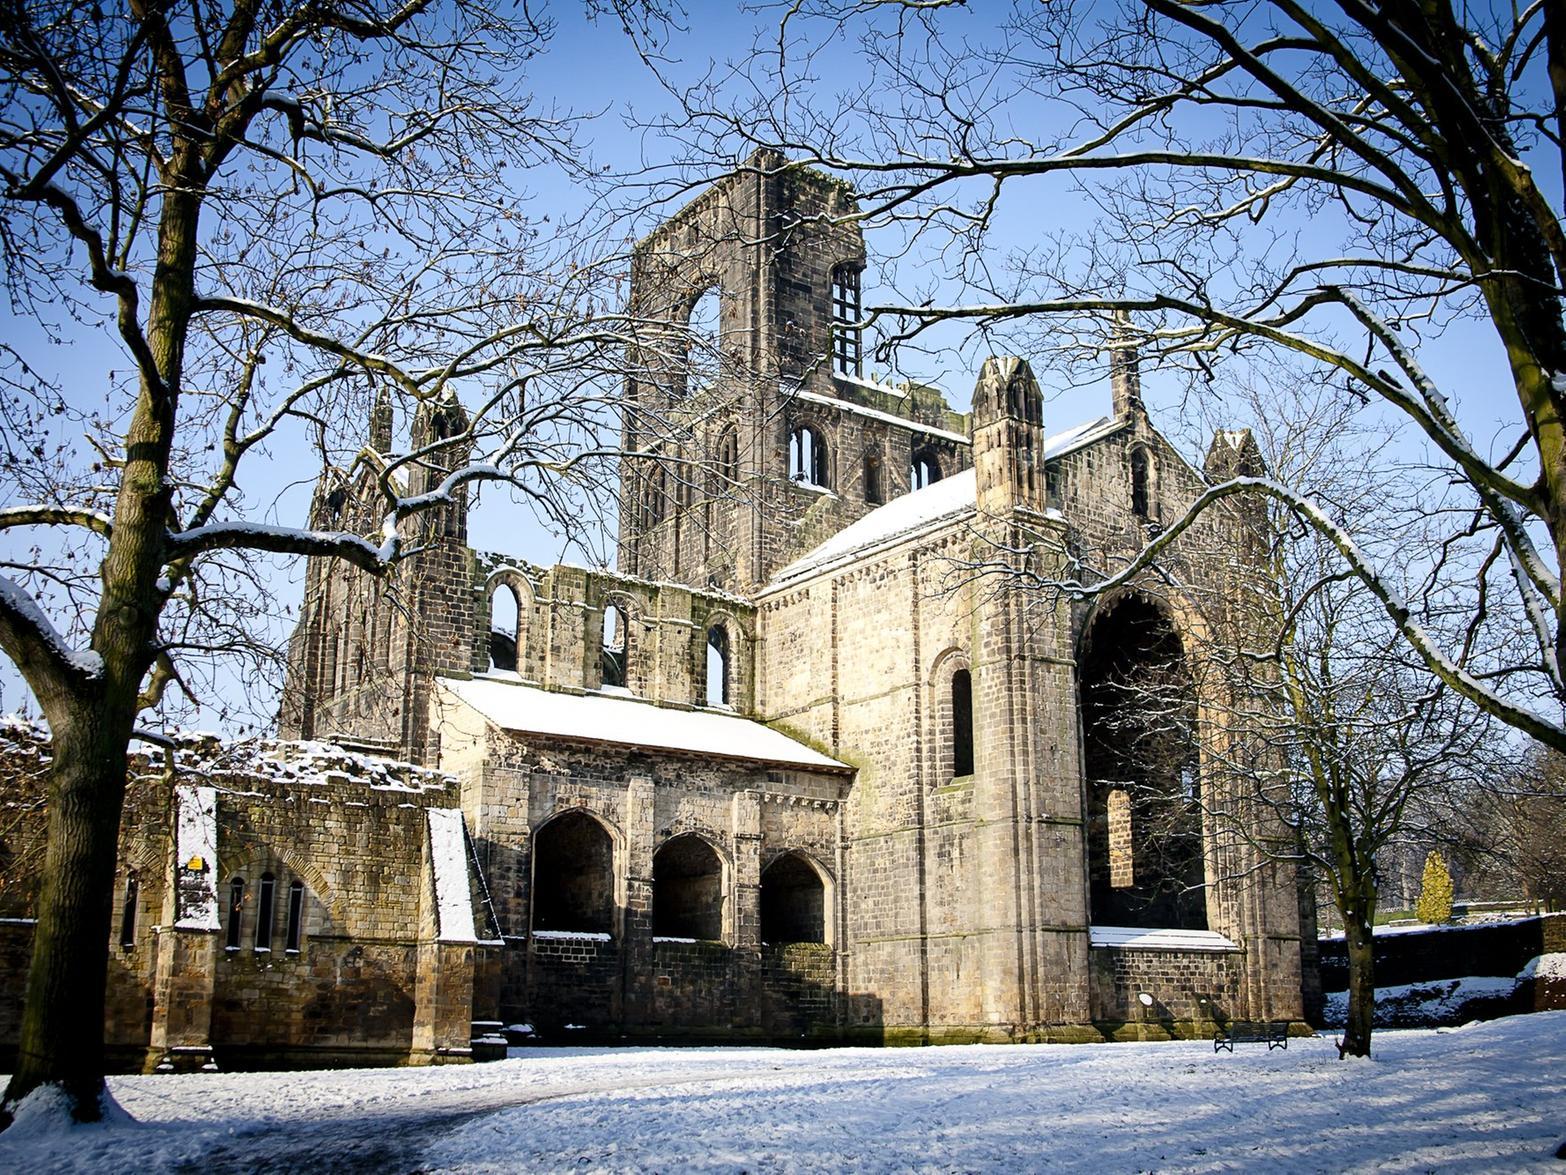 Carol singers will fill the Abbey with festive sounds on December 8 from 2pm-3pm. The Heritage Singers will be joined by the Abbeylands parish. More festive fun with a trail to track down Santa and his reindeer from Dec 27.